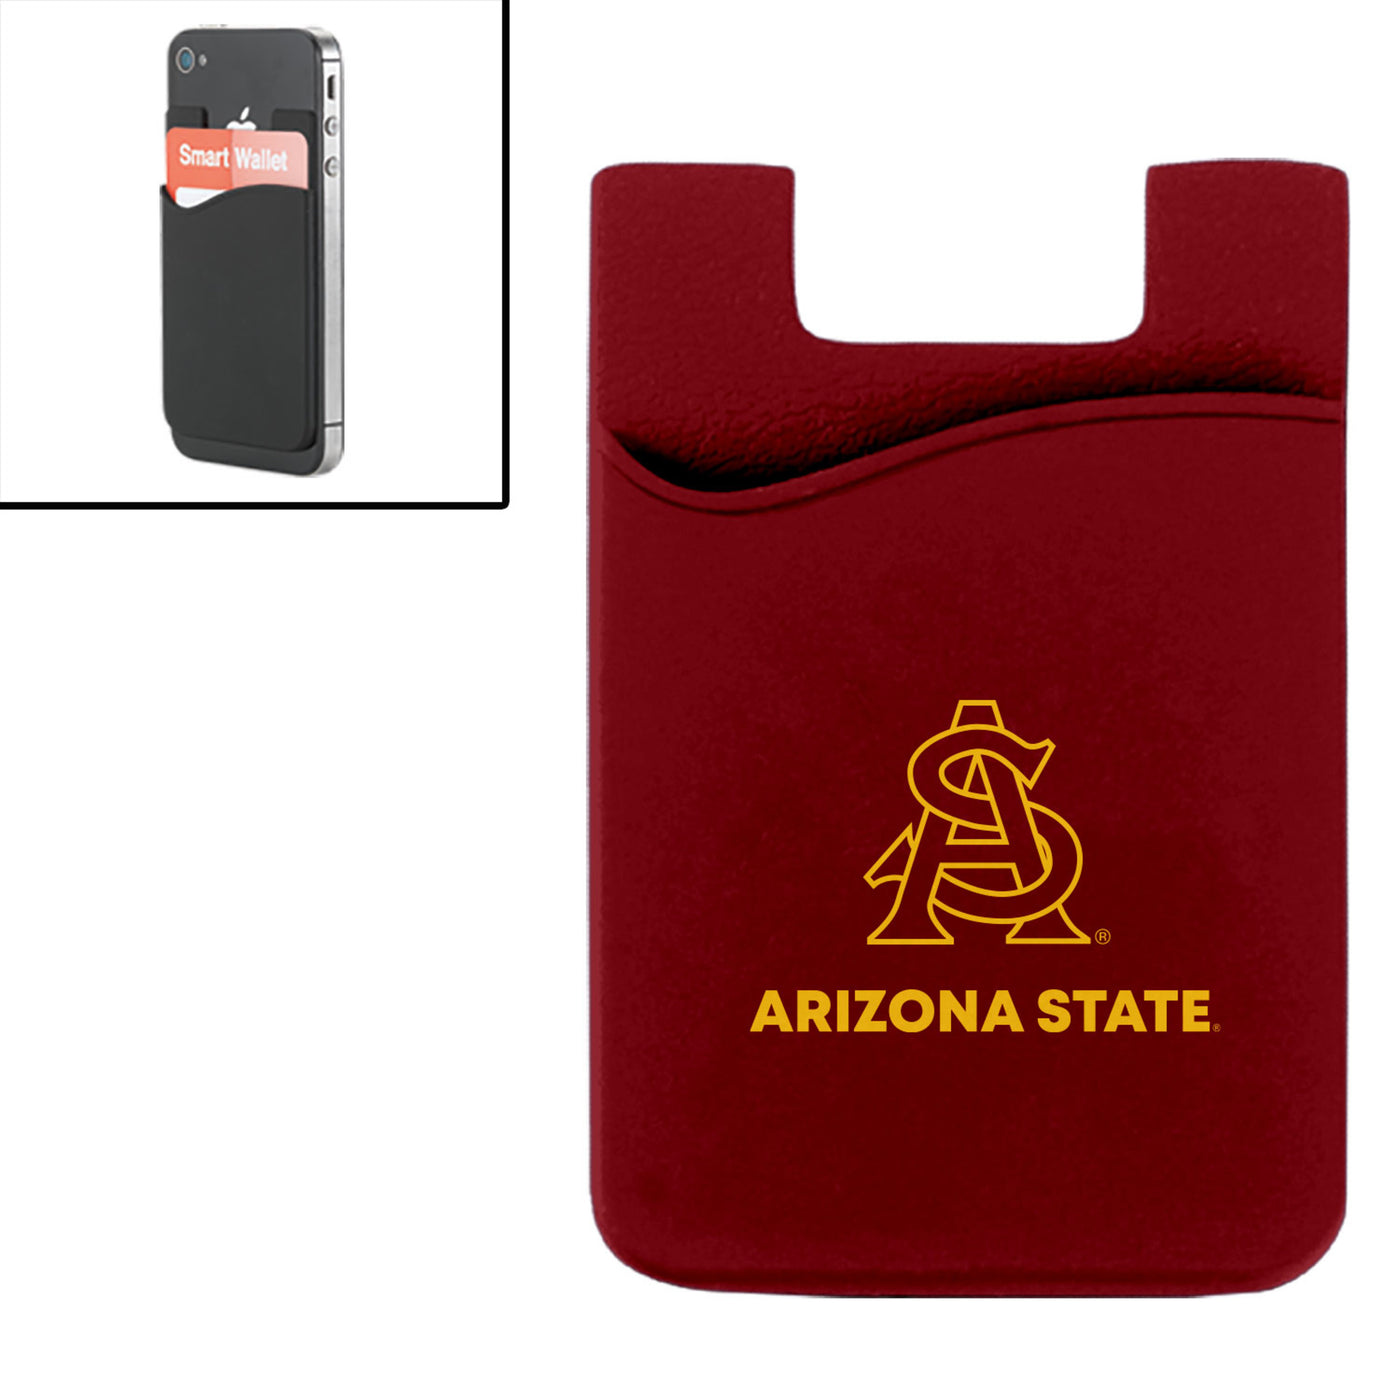 ASU maroon silicone wallet with A&S logo and Arizona State text in gold. Wallet is displayed sticking to the back of a phone. 